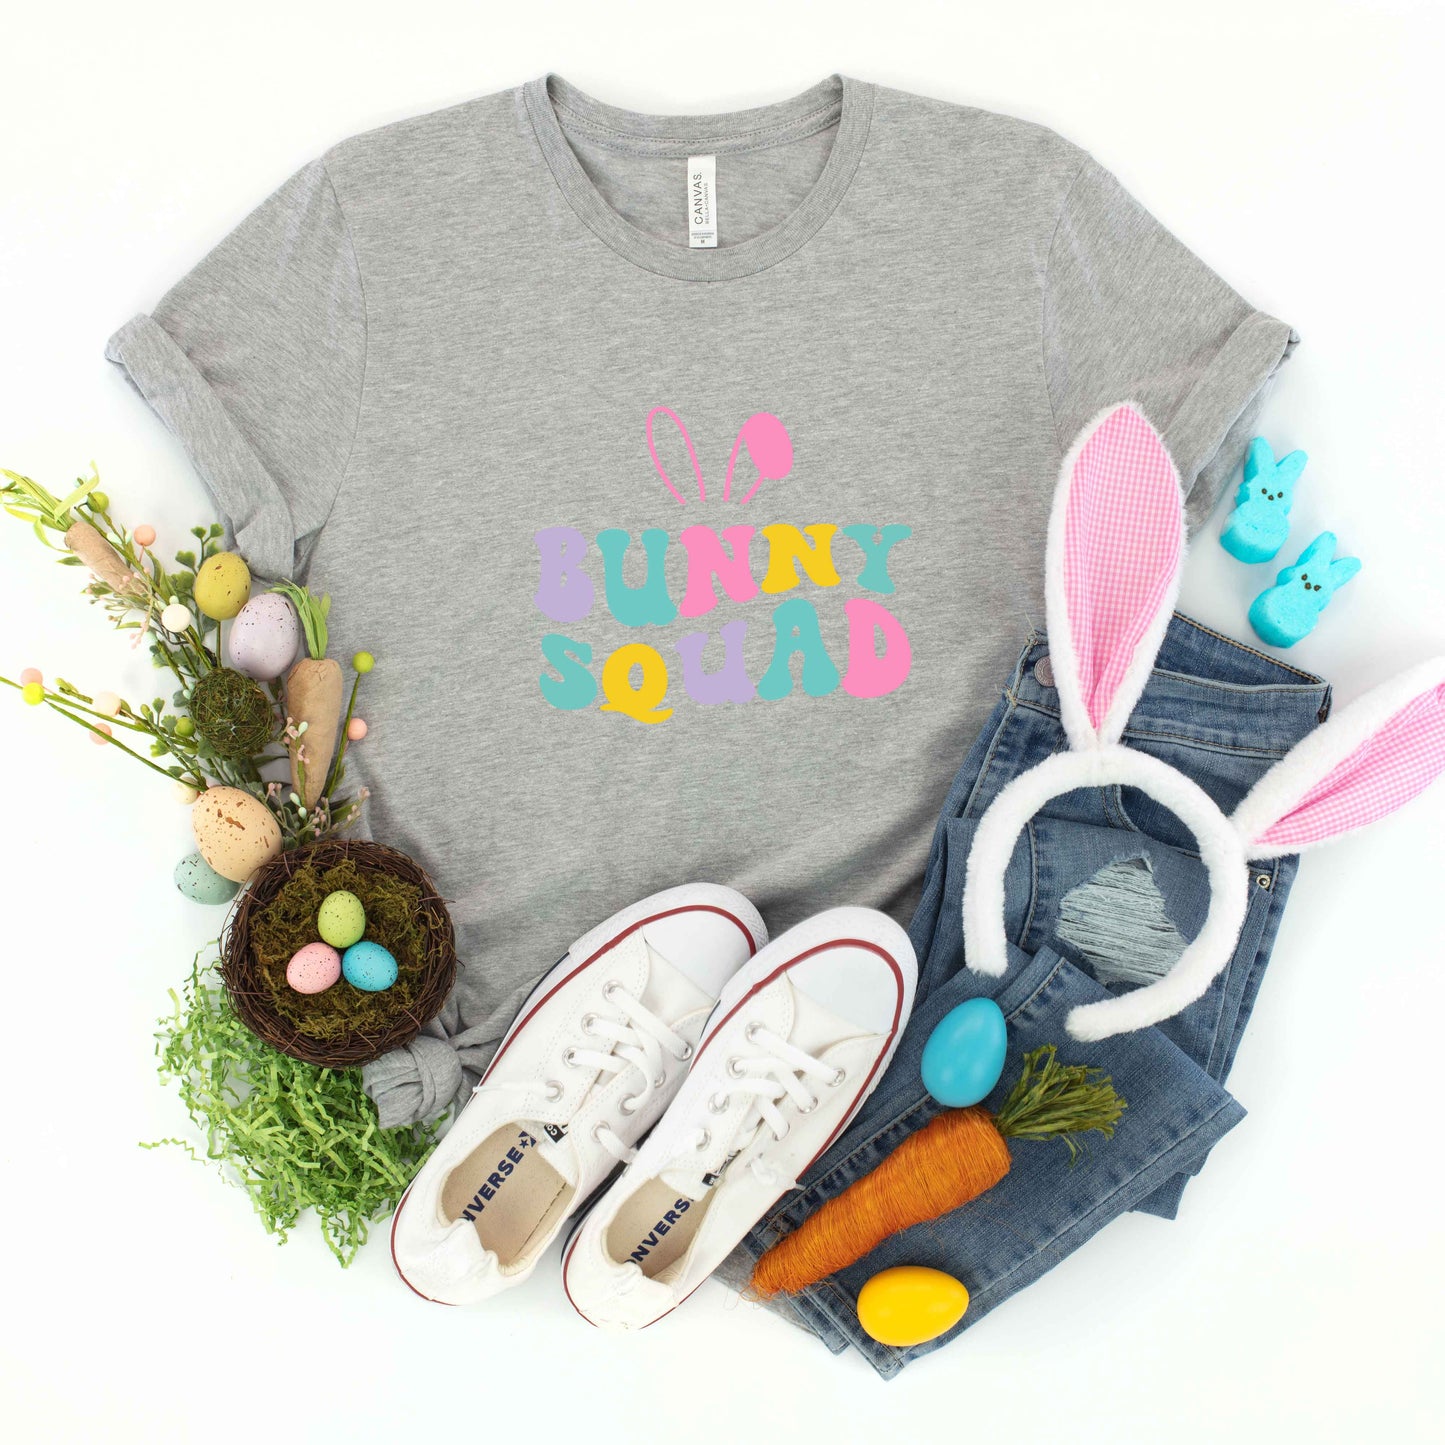 Bunny Squad Colorful | Youth Short Sleeve Crew Neck